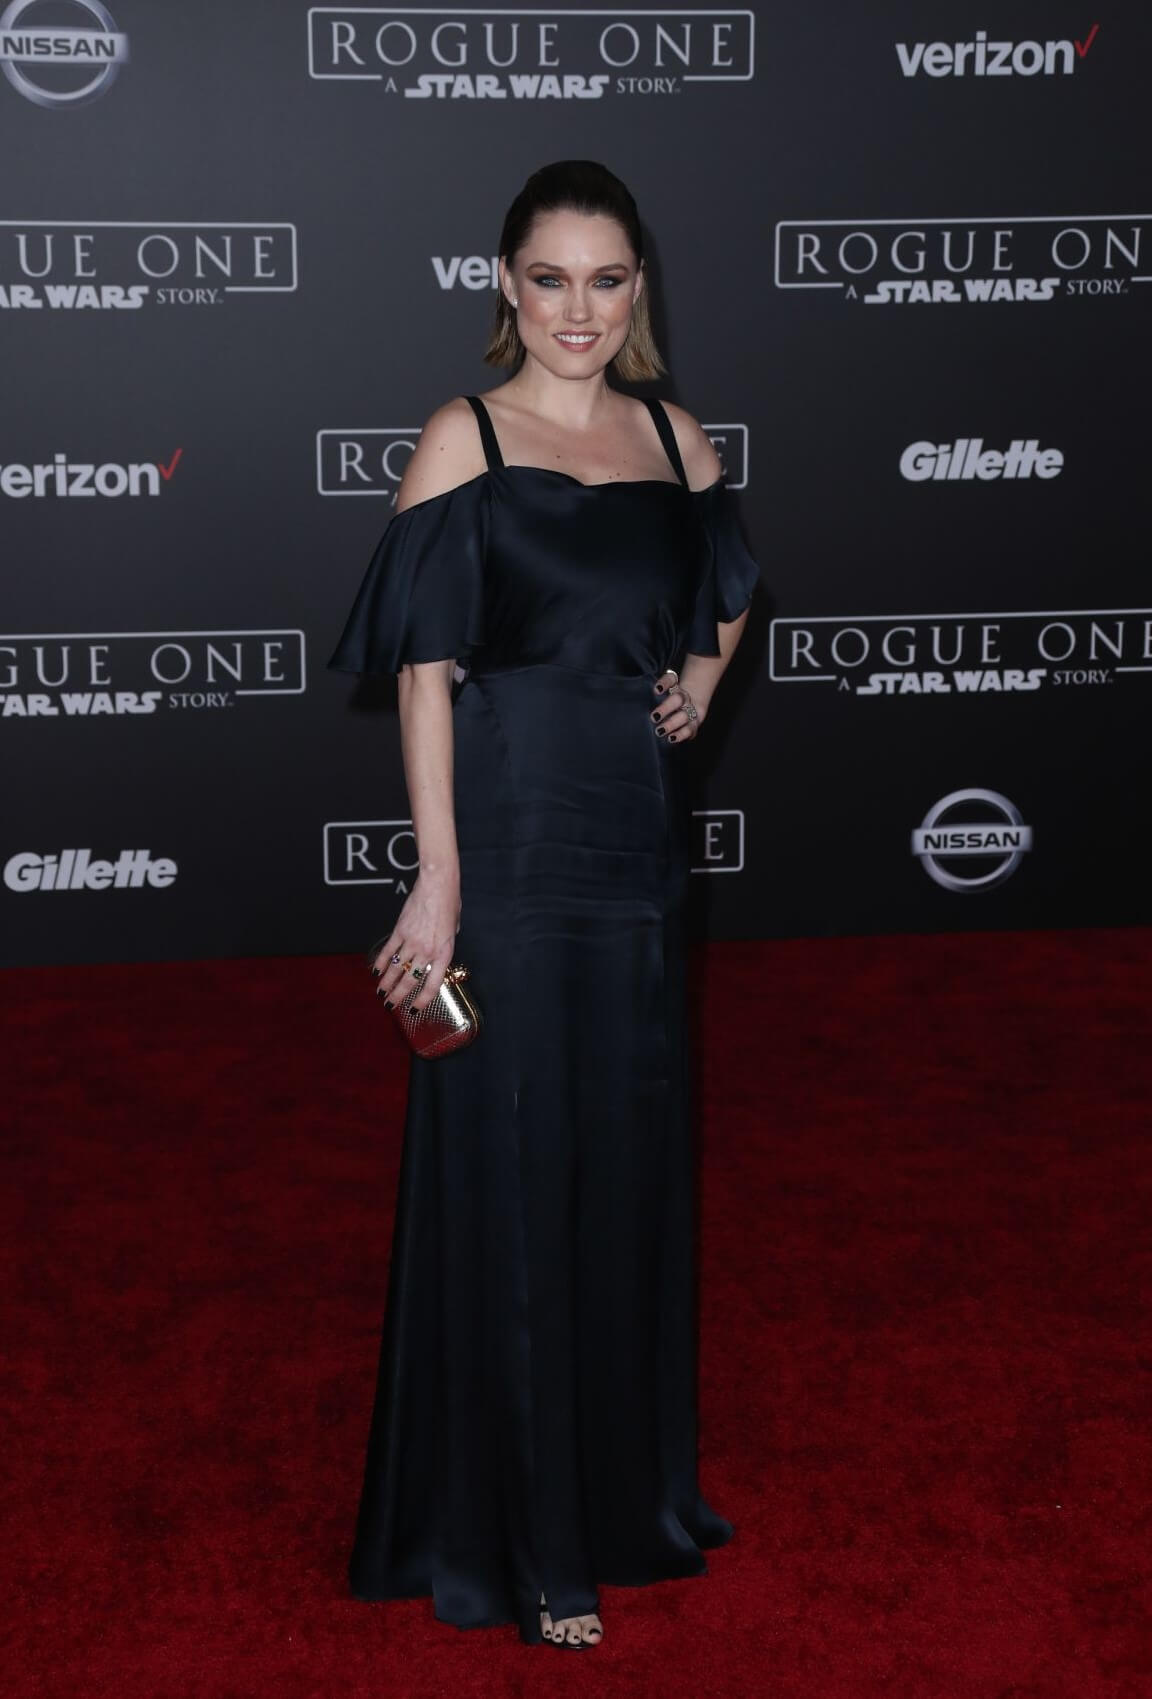 Clare Grant In Black Strap Sleeves Long Gown Dress At ‘Rogue One: A Star Wars Story Premiere in Hollywood